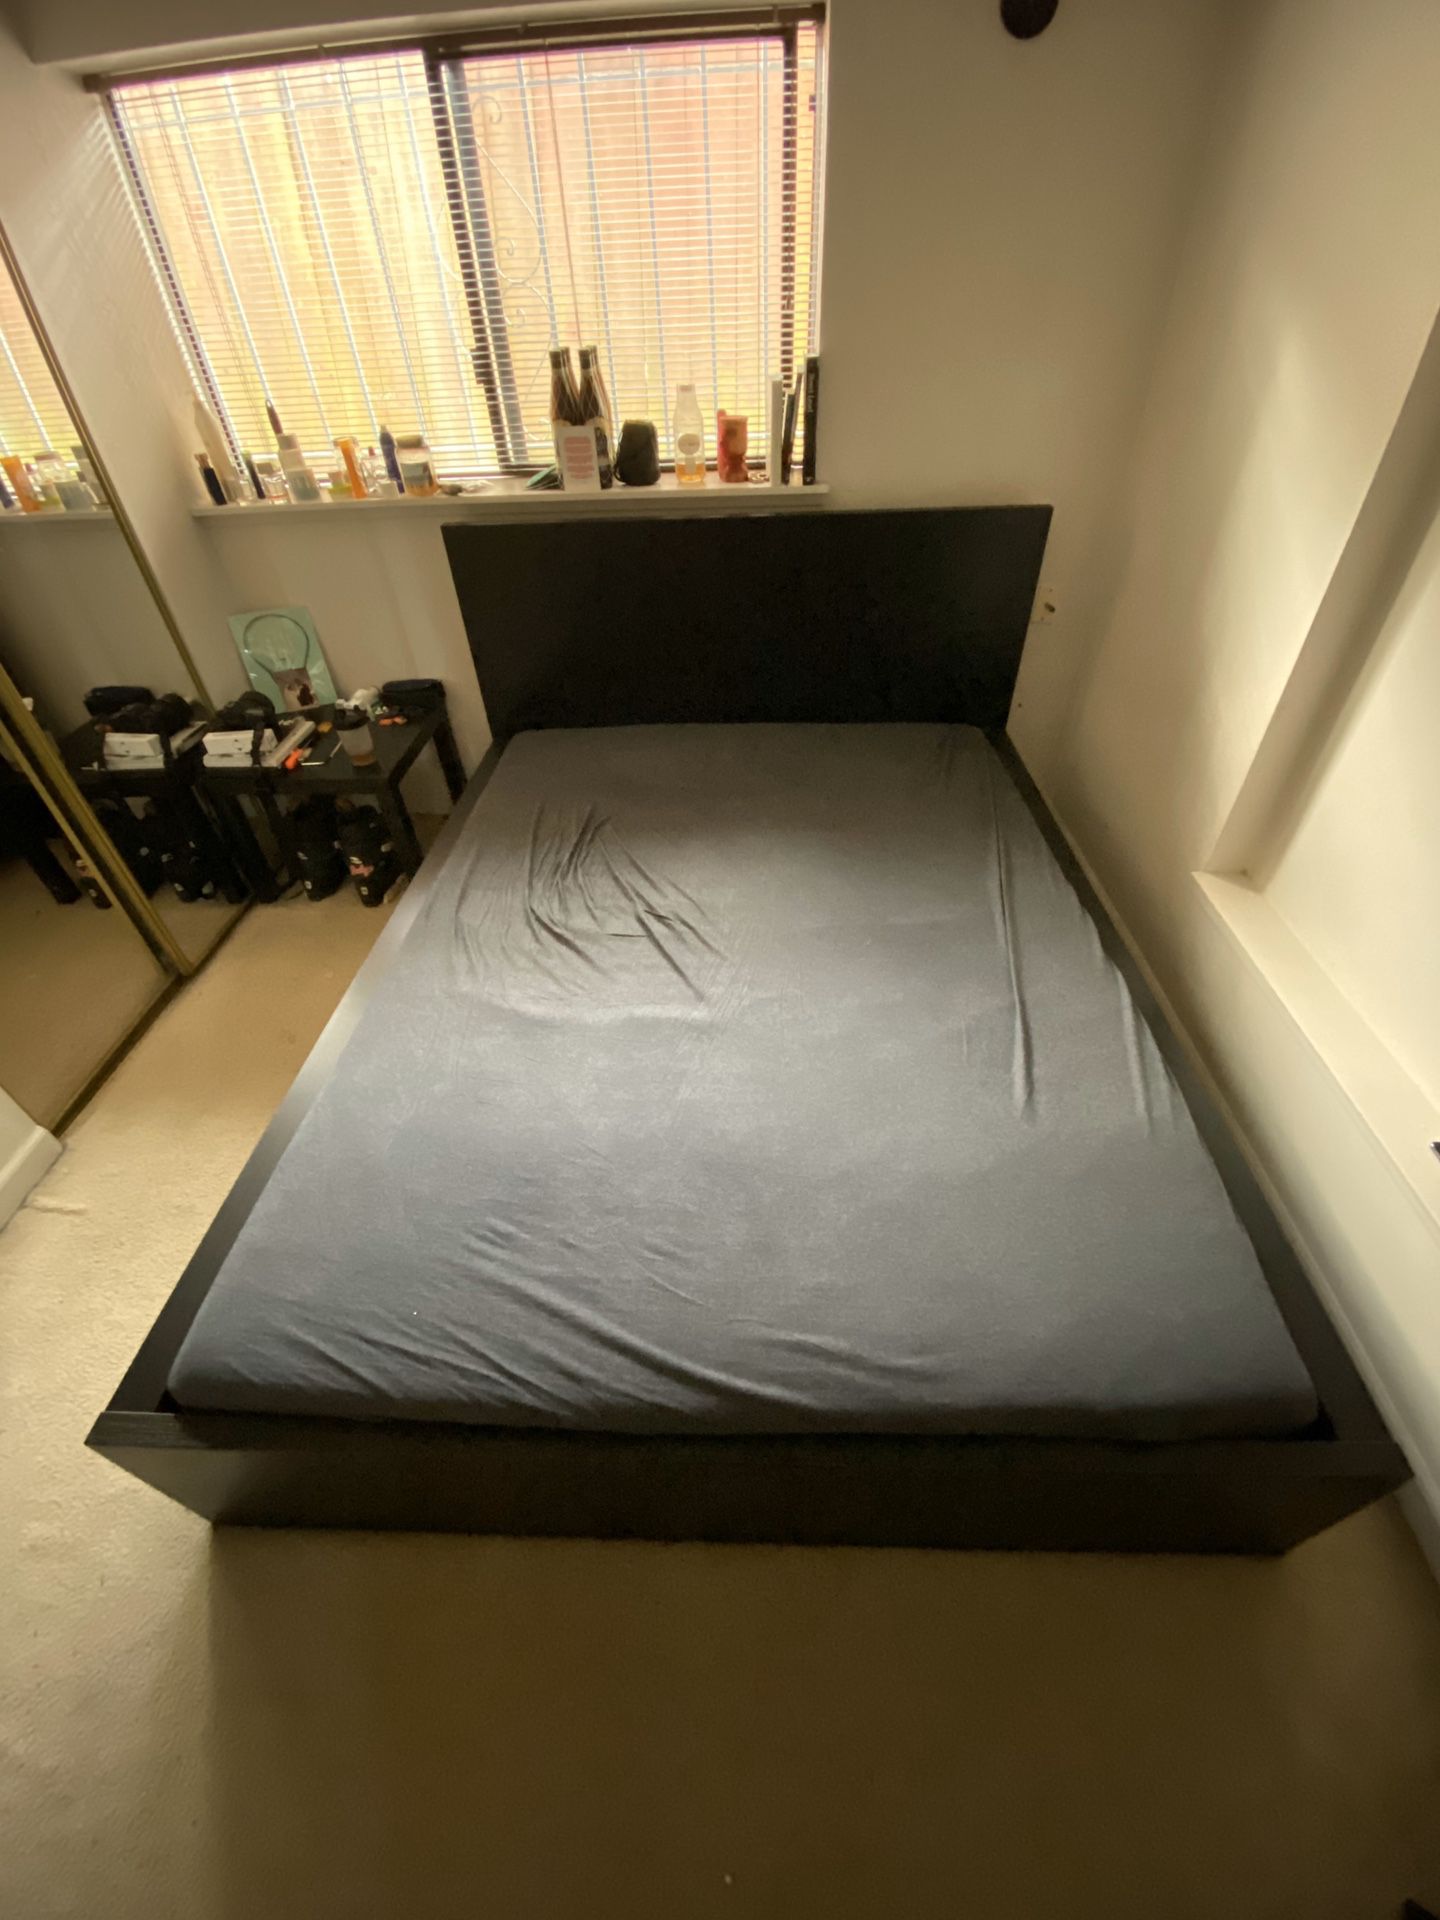 IKEA bed for sale , mattress and frame. OBO